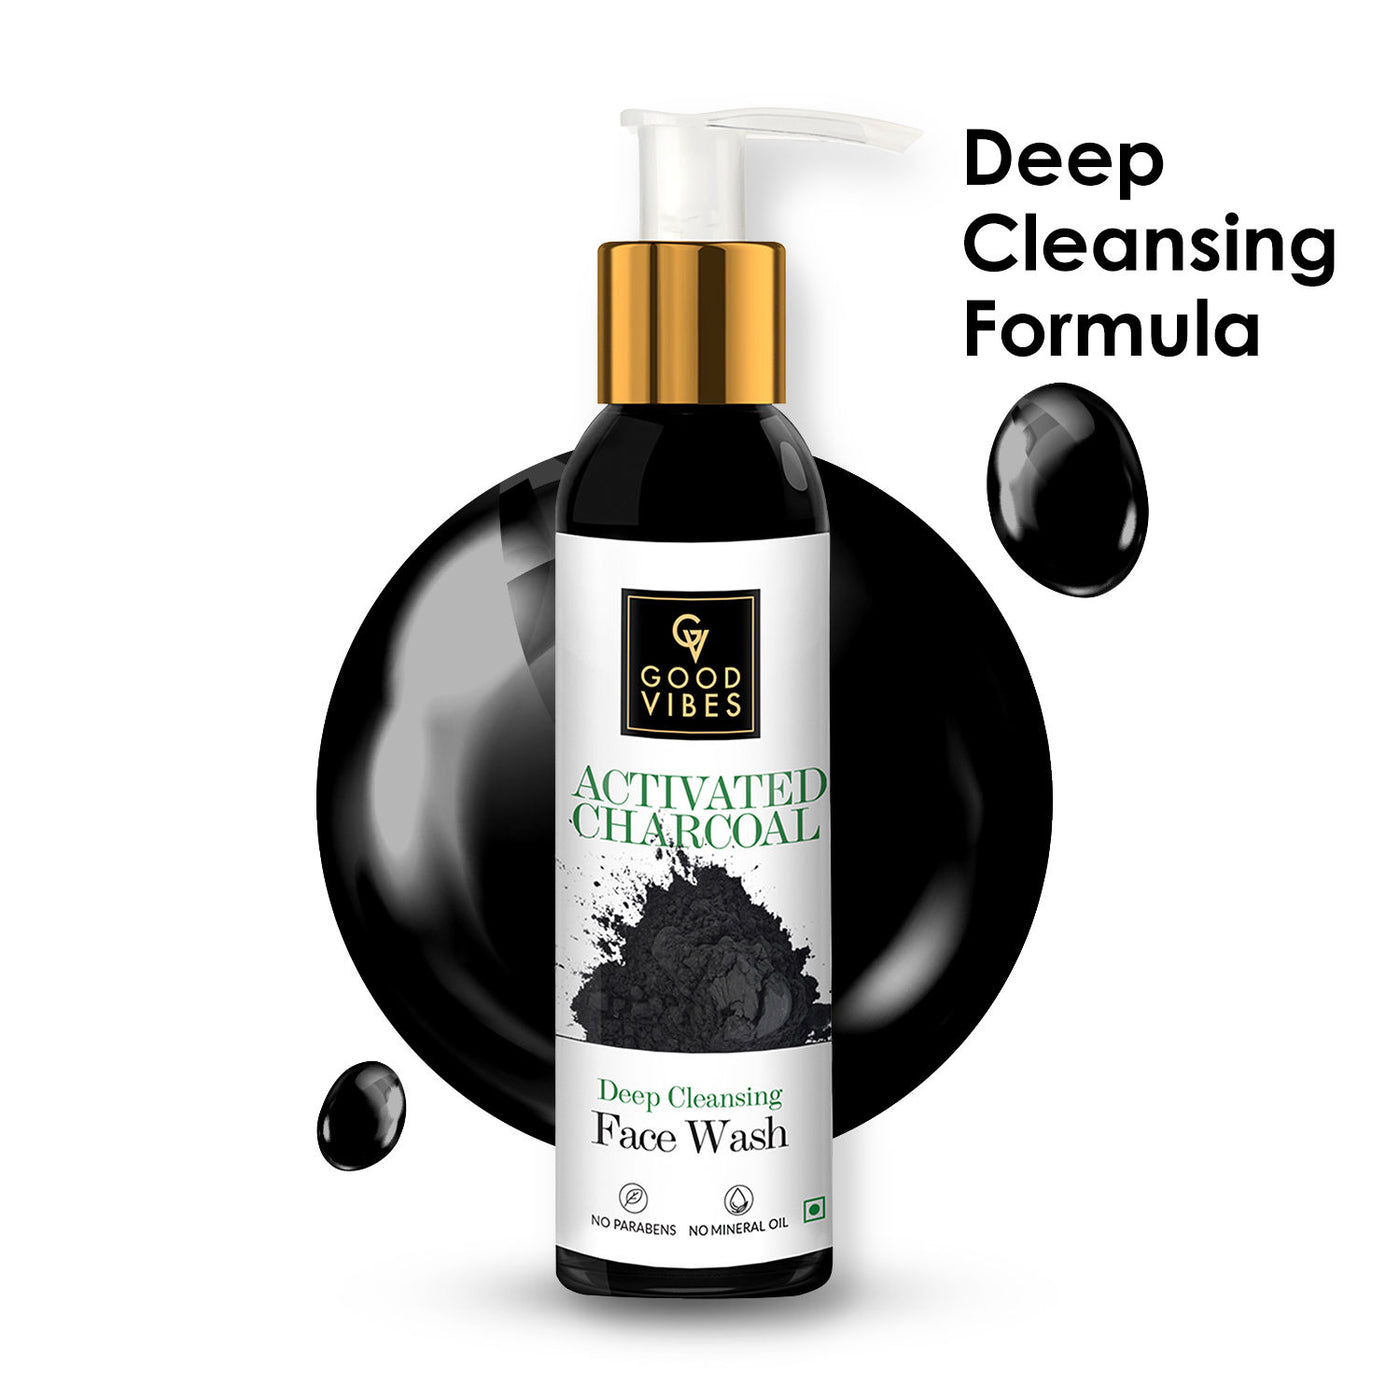 good-vibes-deep-cleansing-face-wash-activated-charcoal-200-ml-1-17-6